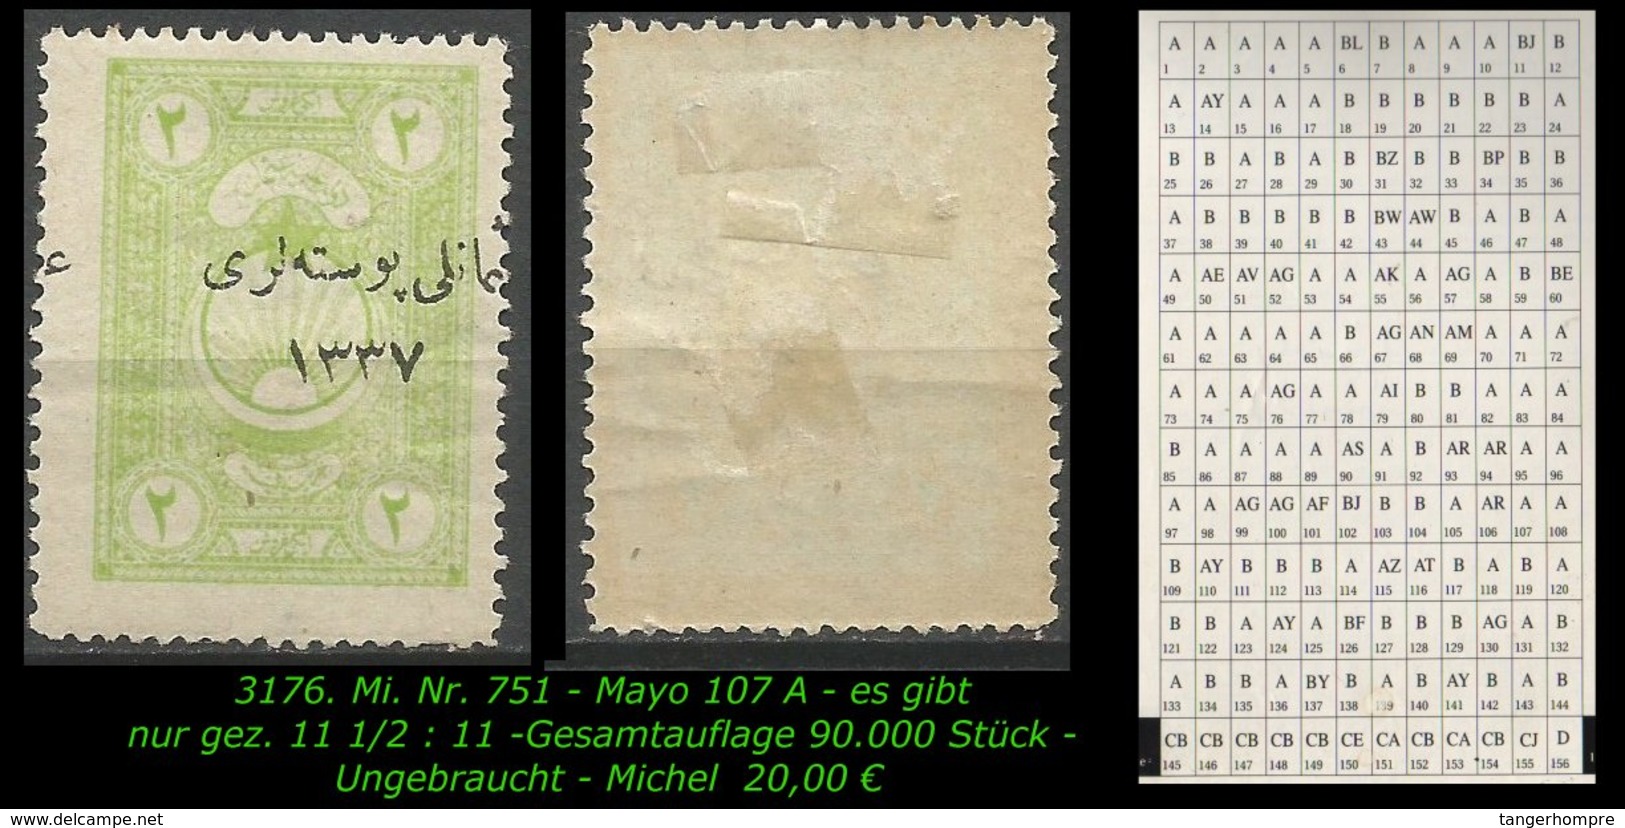 TURKEY ,EARLY OTTOMAN SPECIALIZED FOR SPECIALIST, SEE.. Mi. Nr. 751 - Mayo 107 A - 1920-21 Kleinasien